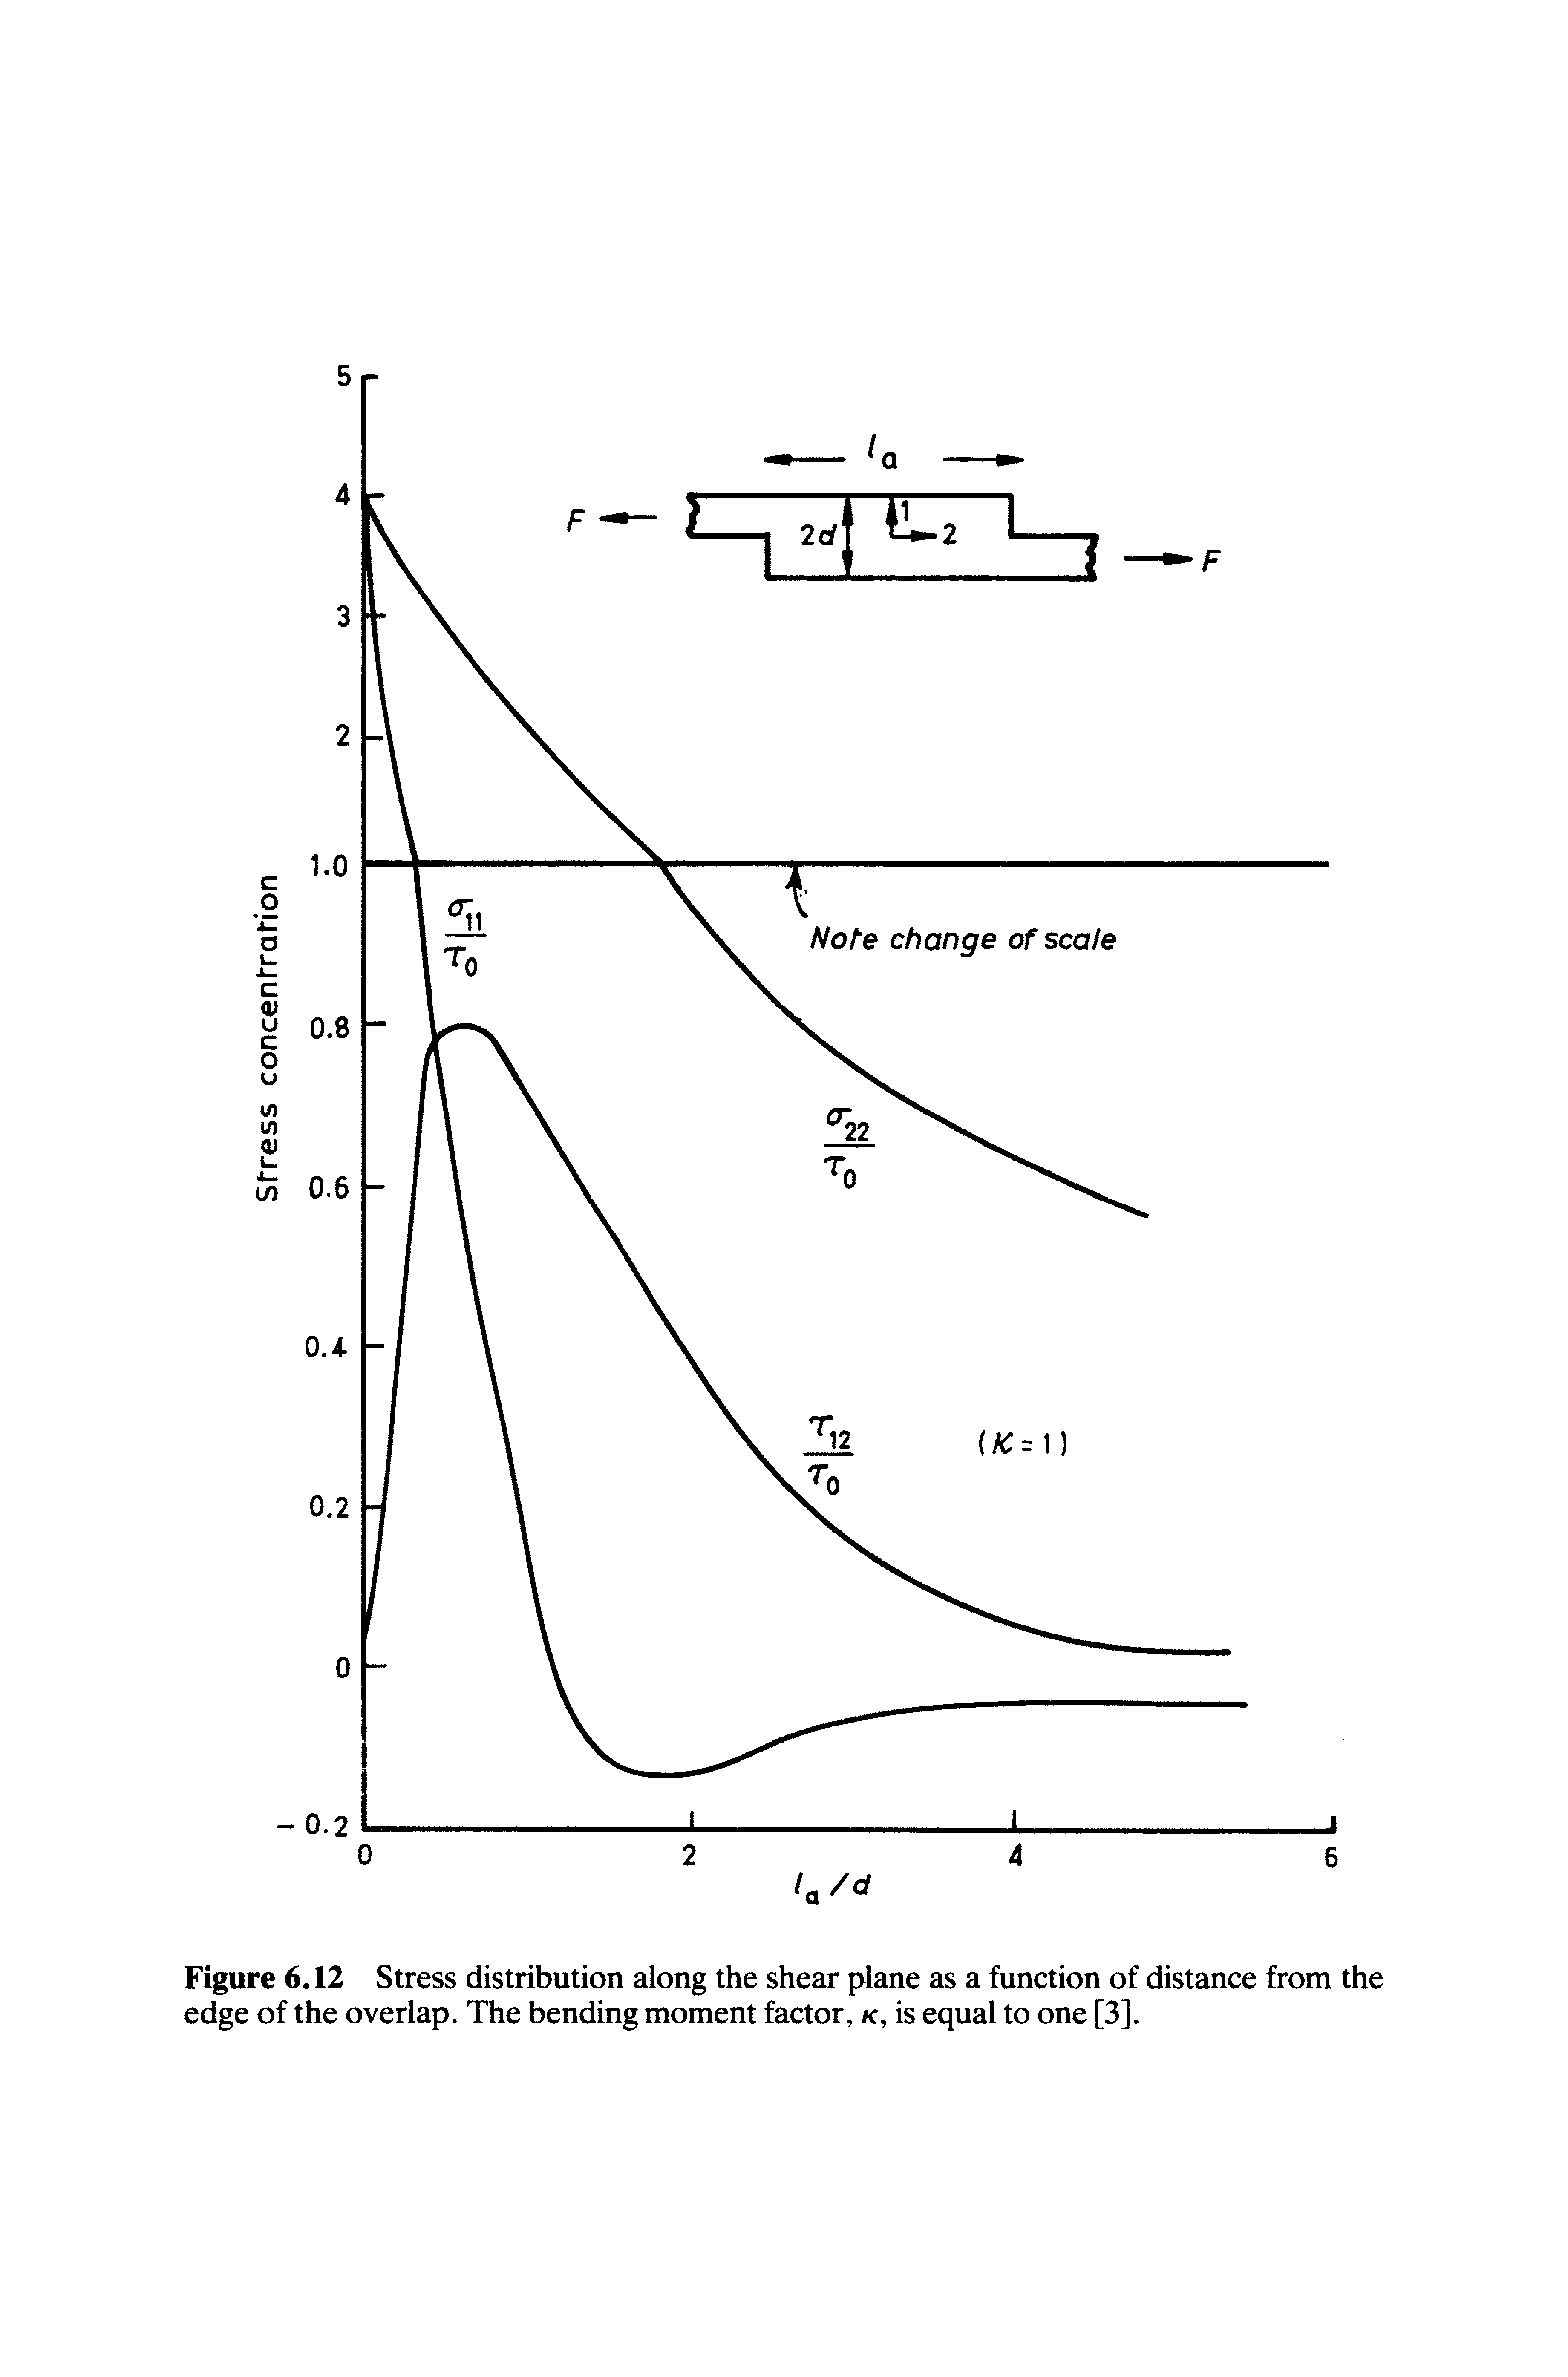 Figure 6.12 Stress distribution along the shear plane as a function of distance from the edge of the overlap. The bending moment factor, k, is equal to one [3].